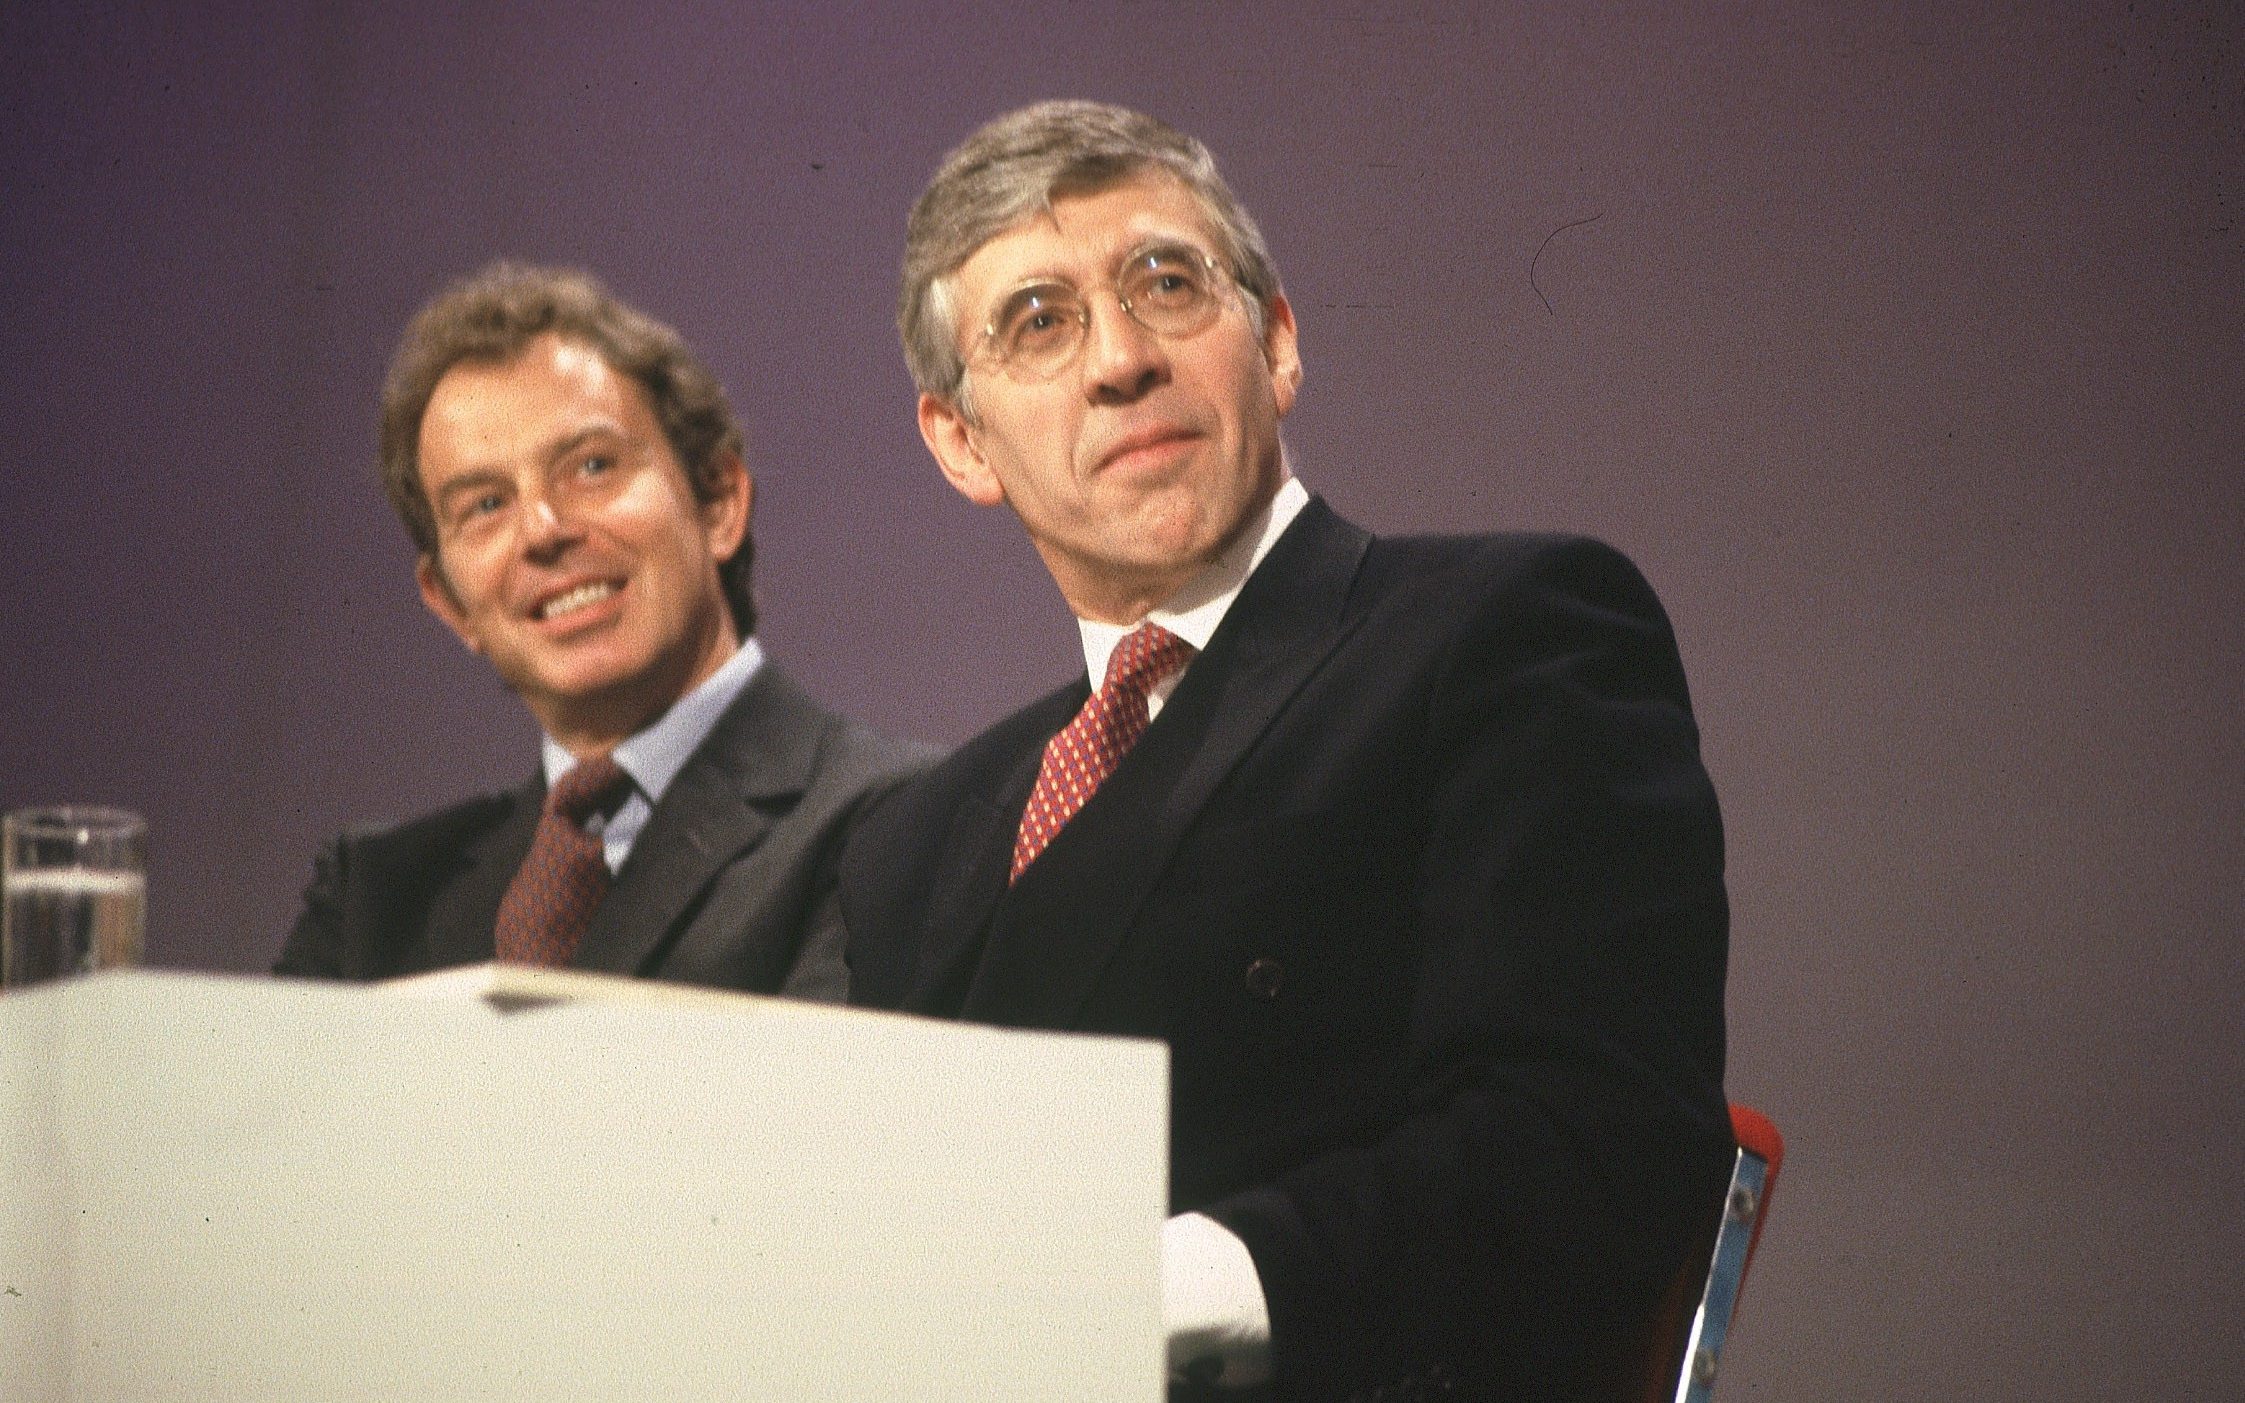 jack straw ‘was source’ of daily mail’s story about stephen lawrence